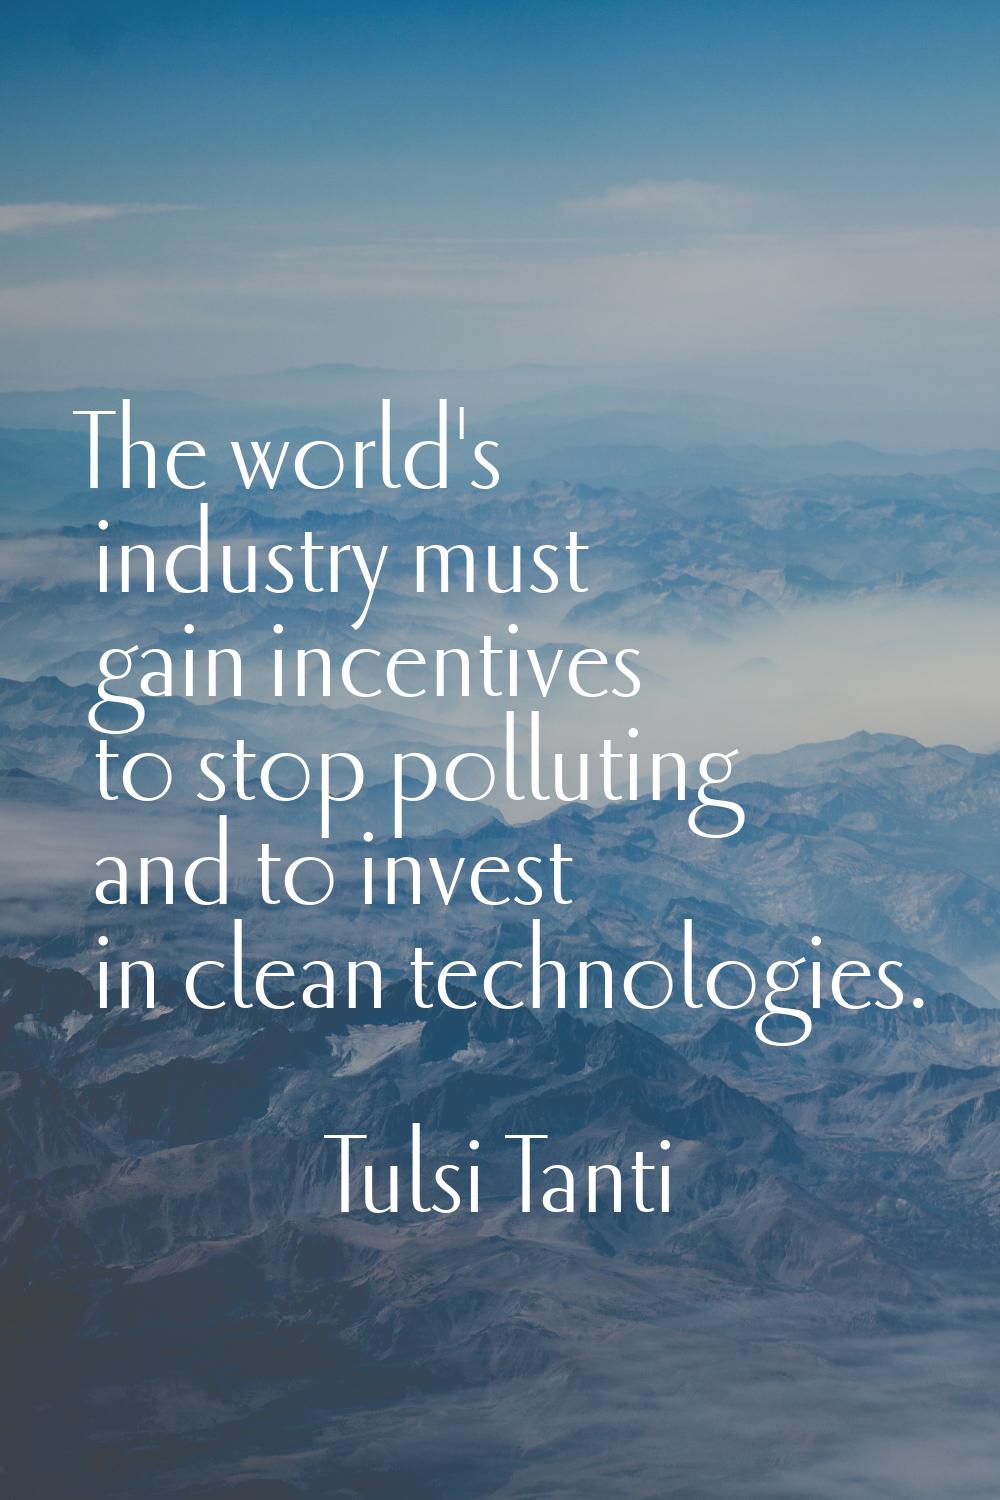 The world's industry must gain incentives to stop polluting and to invest in clean technologies.